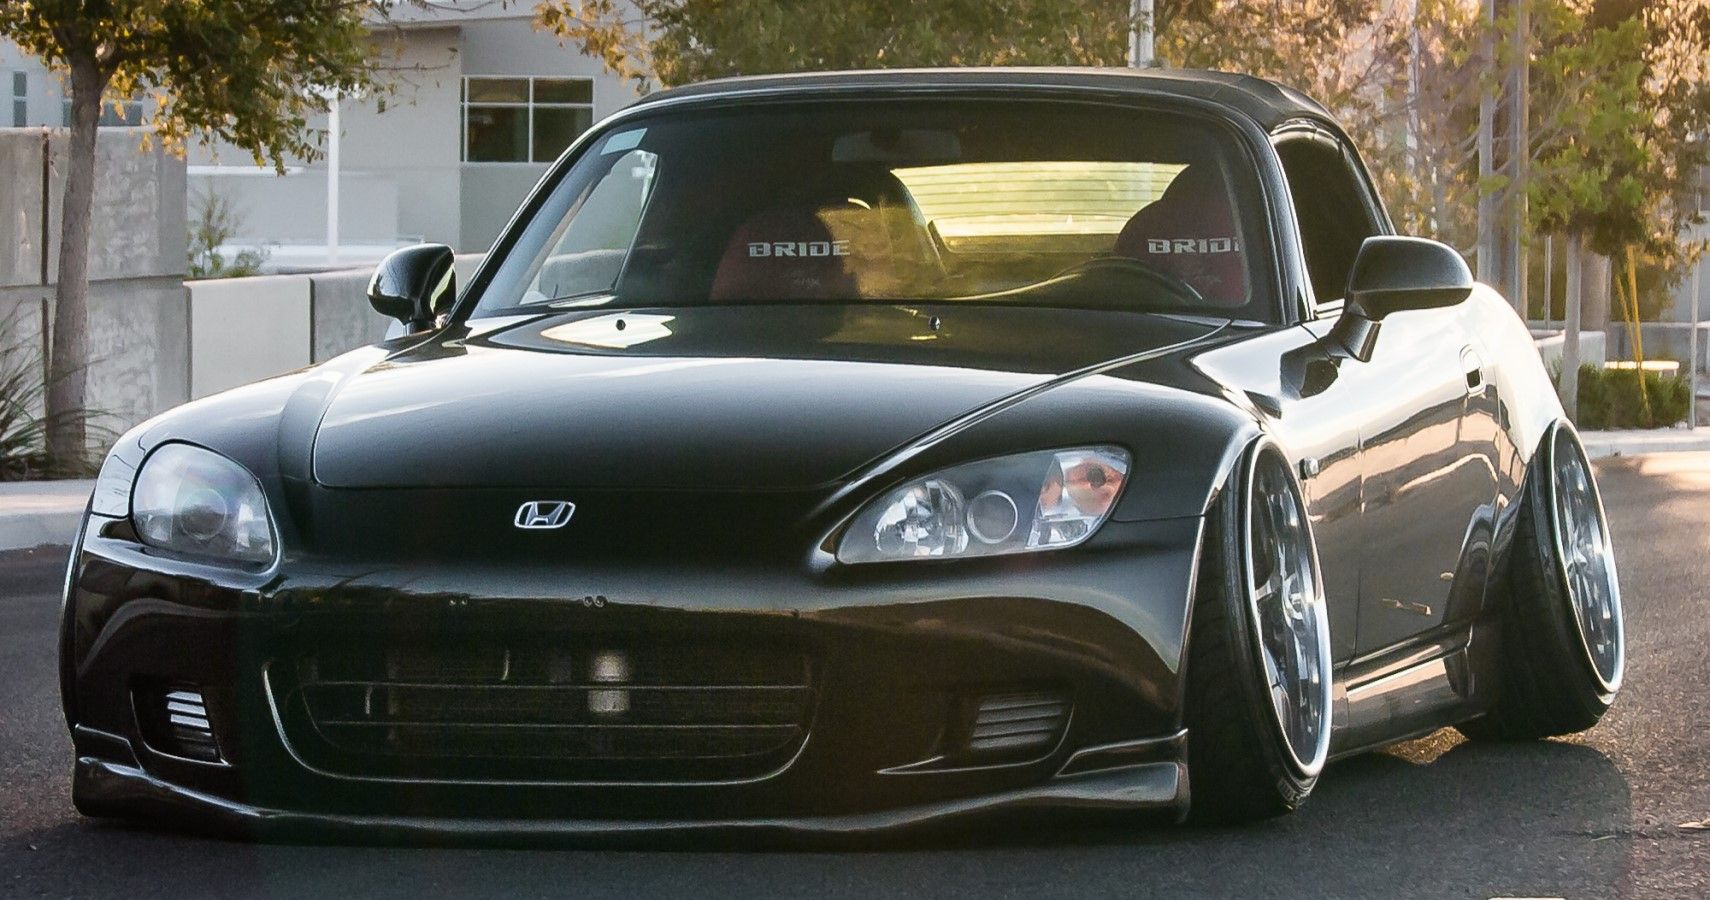 Stanced Honda S2000 on the road front third quarter view